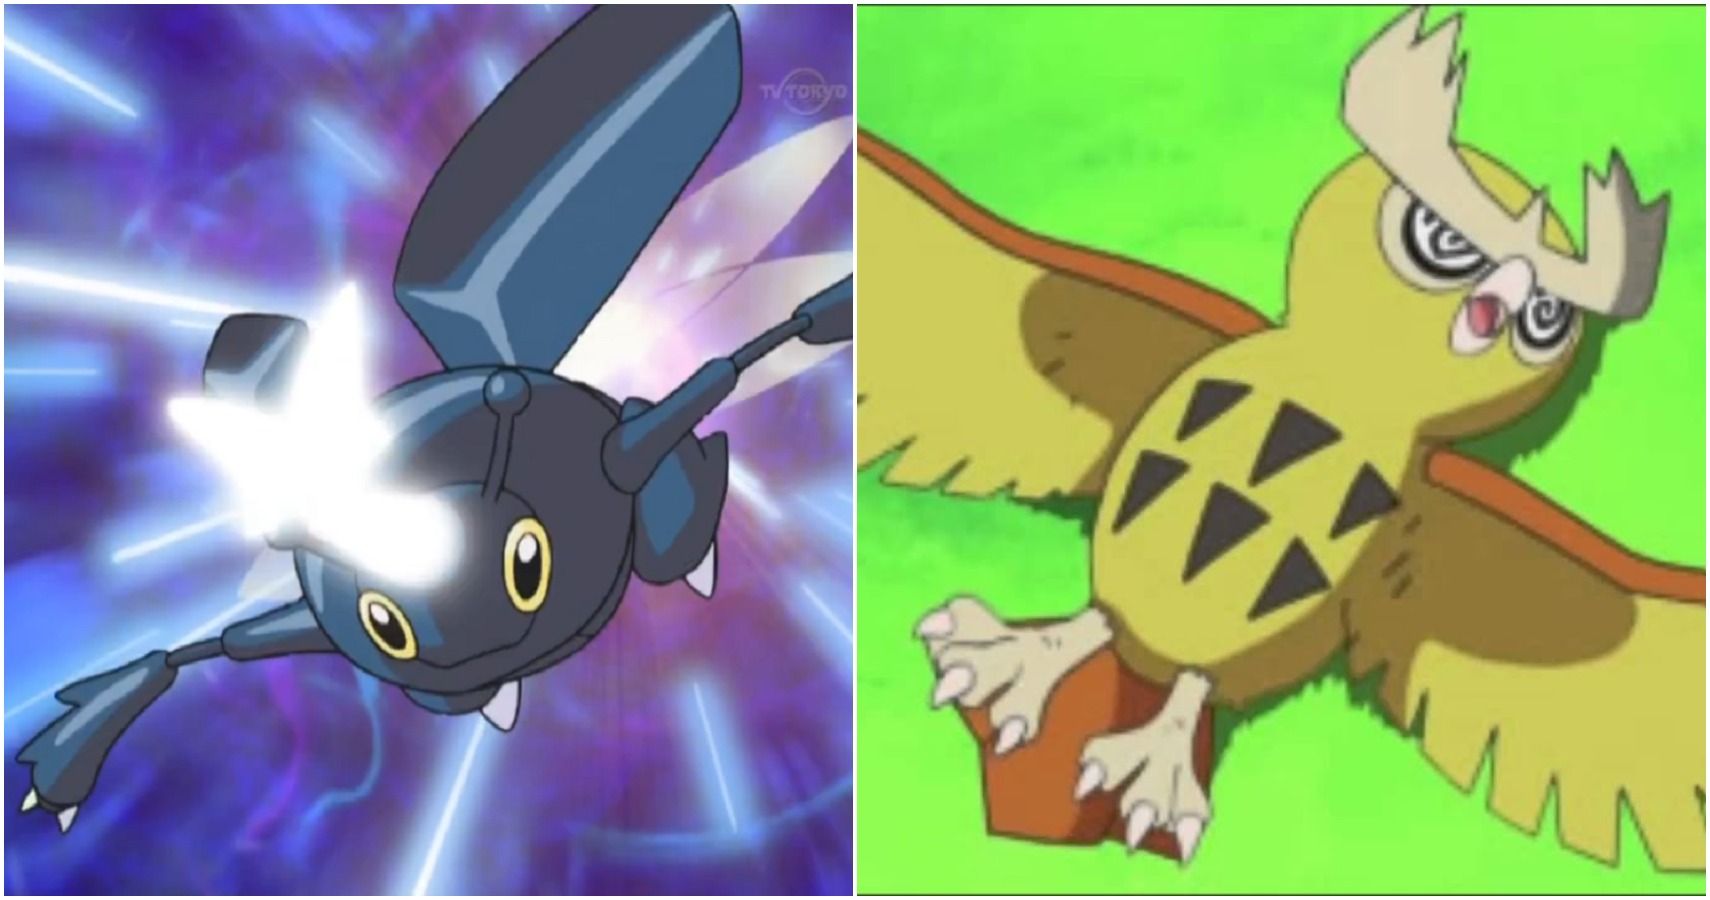 Ash's Heracross using Mega Horn and Ash's Noctowl fainted